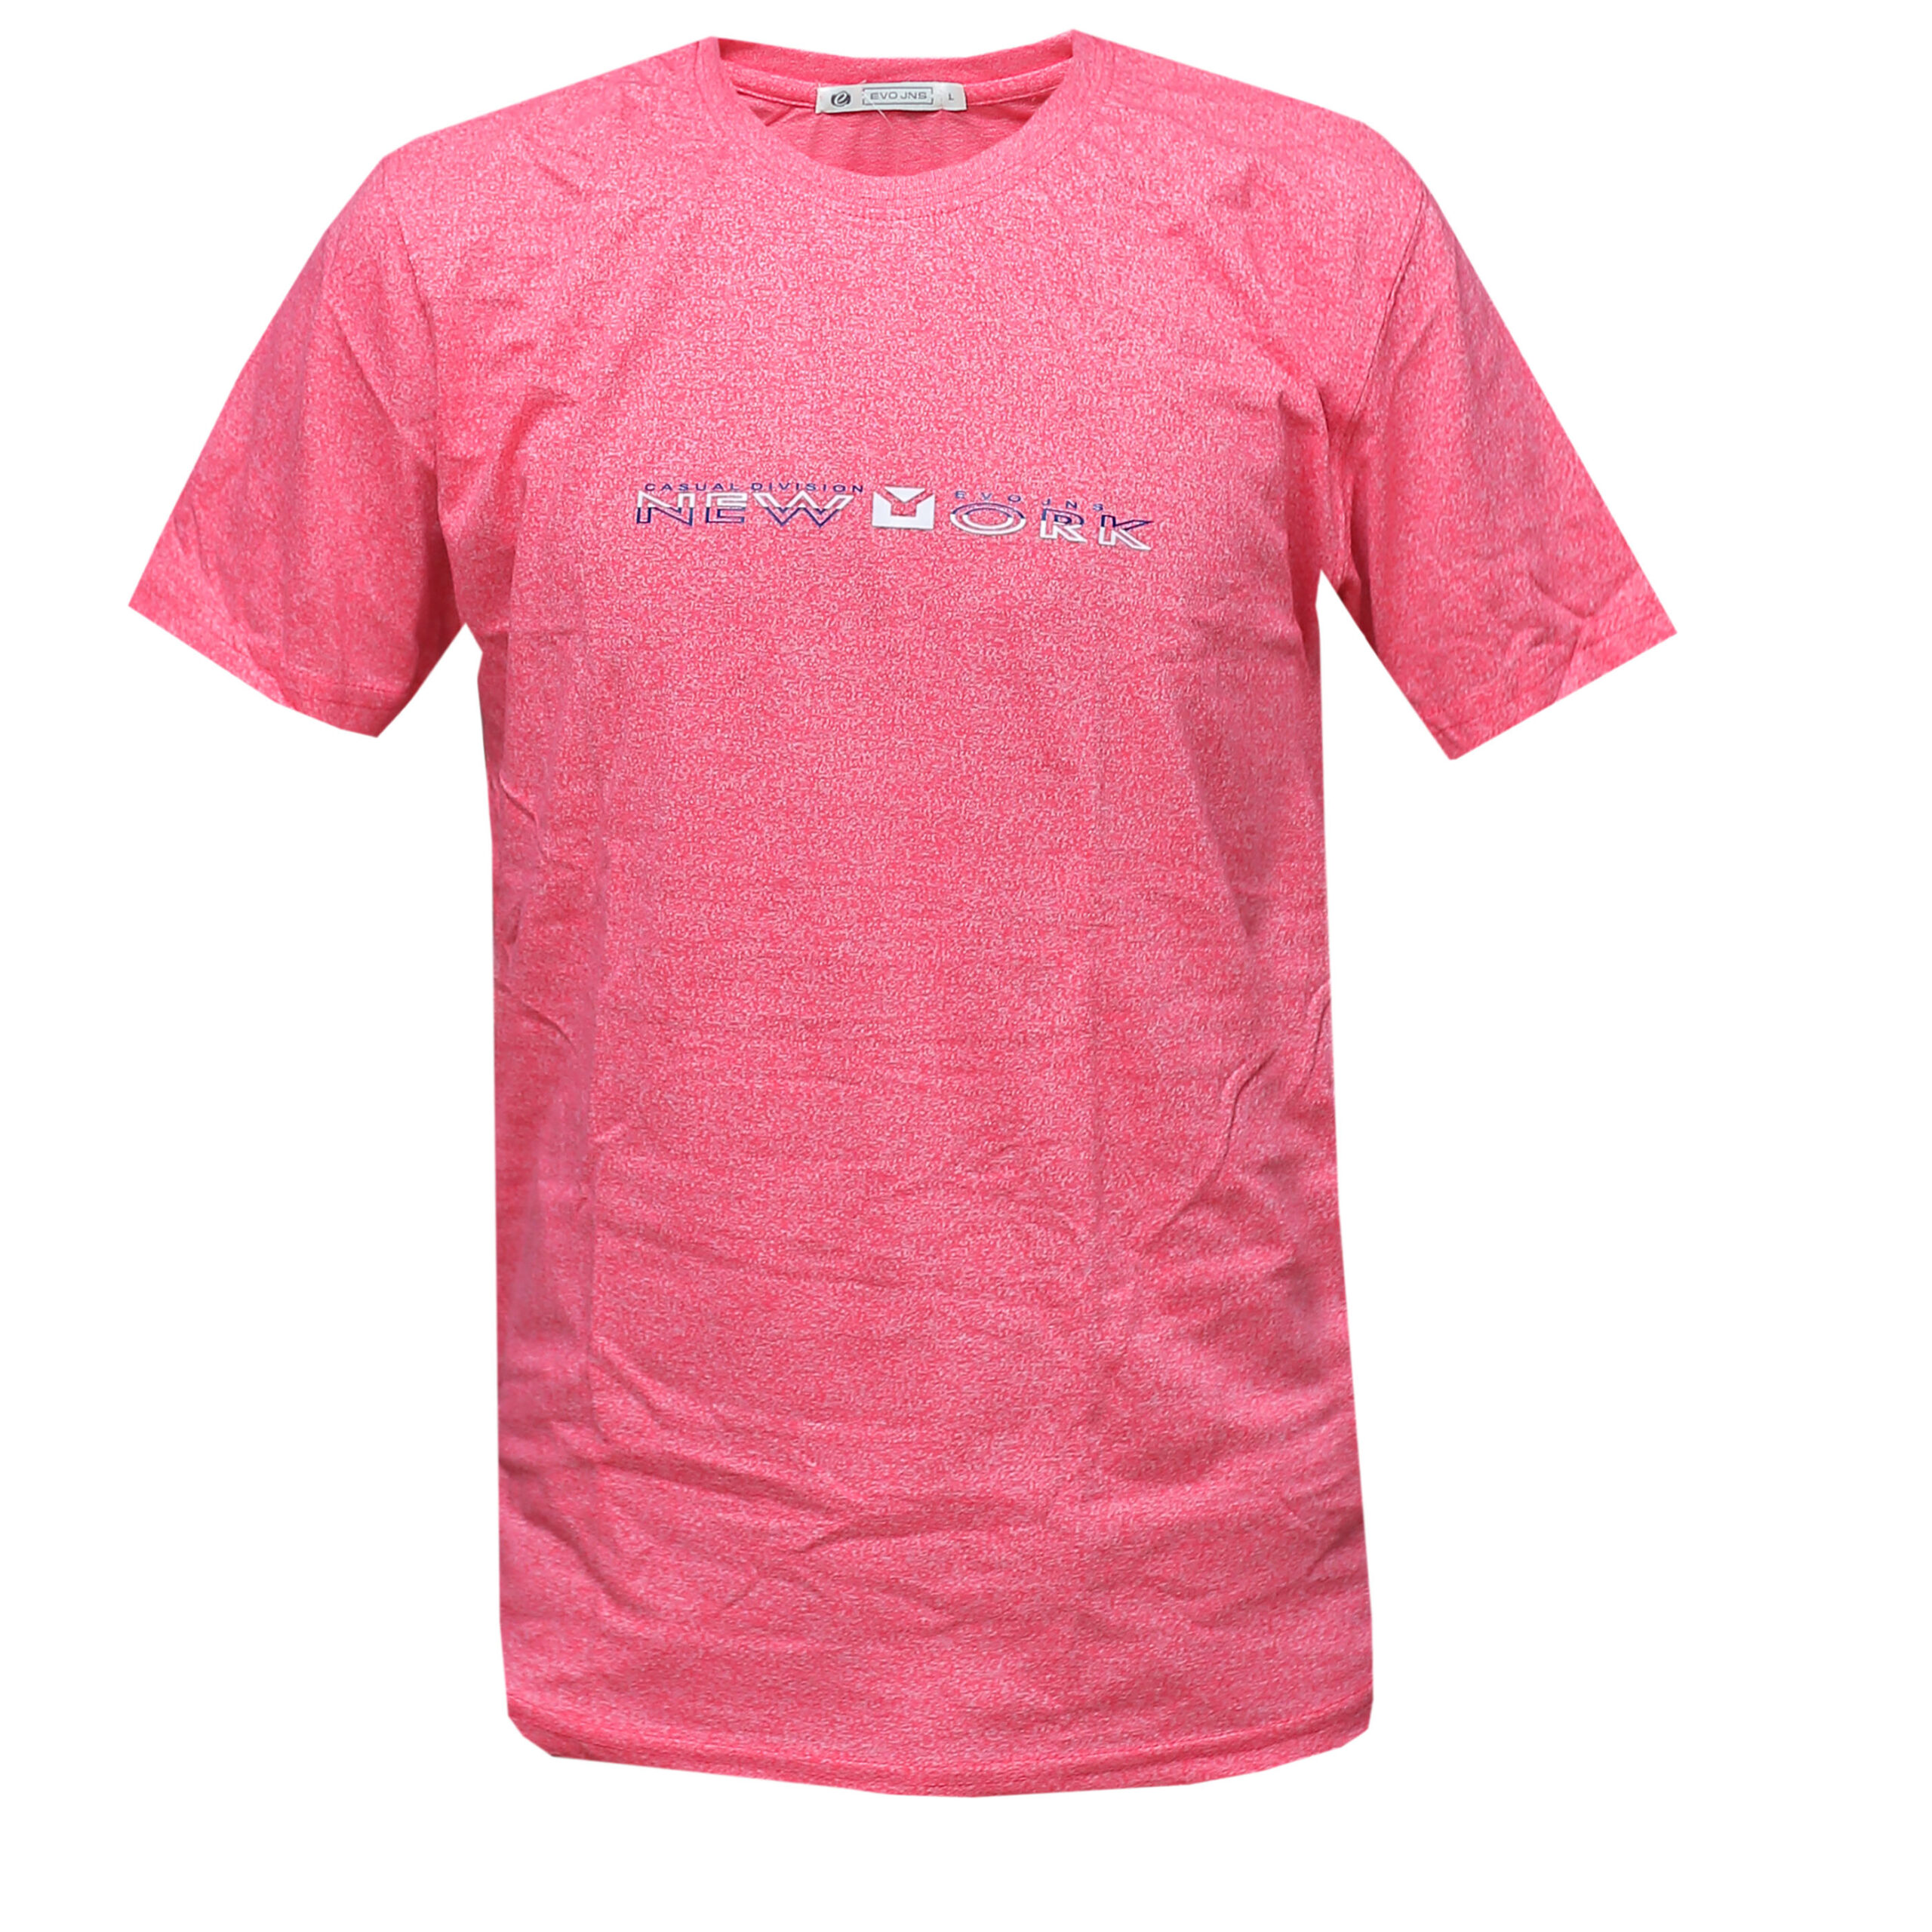 Soft T-Shirt for Men - Easy Casual Wear